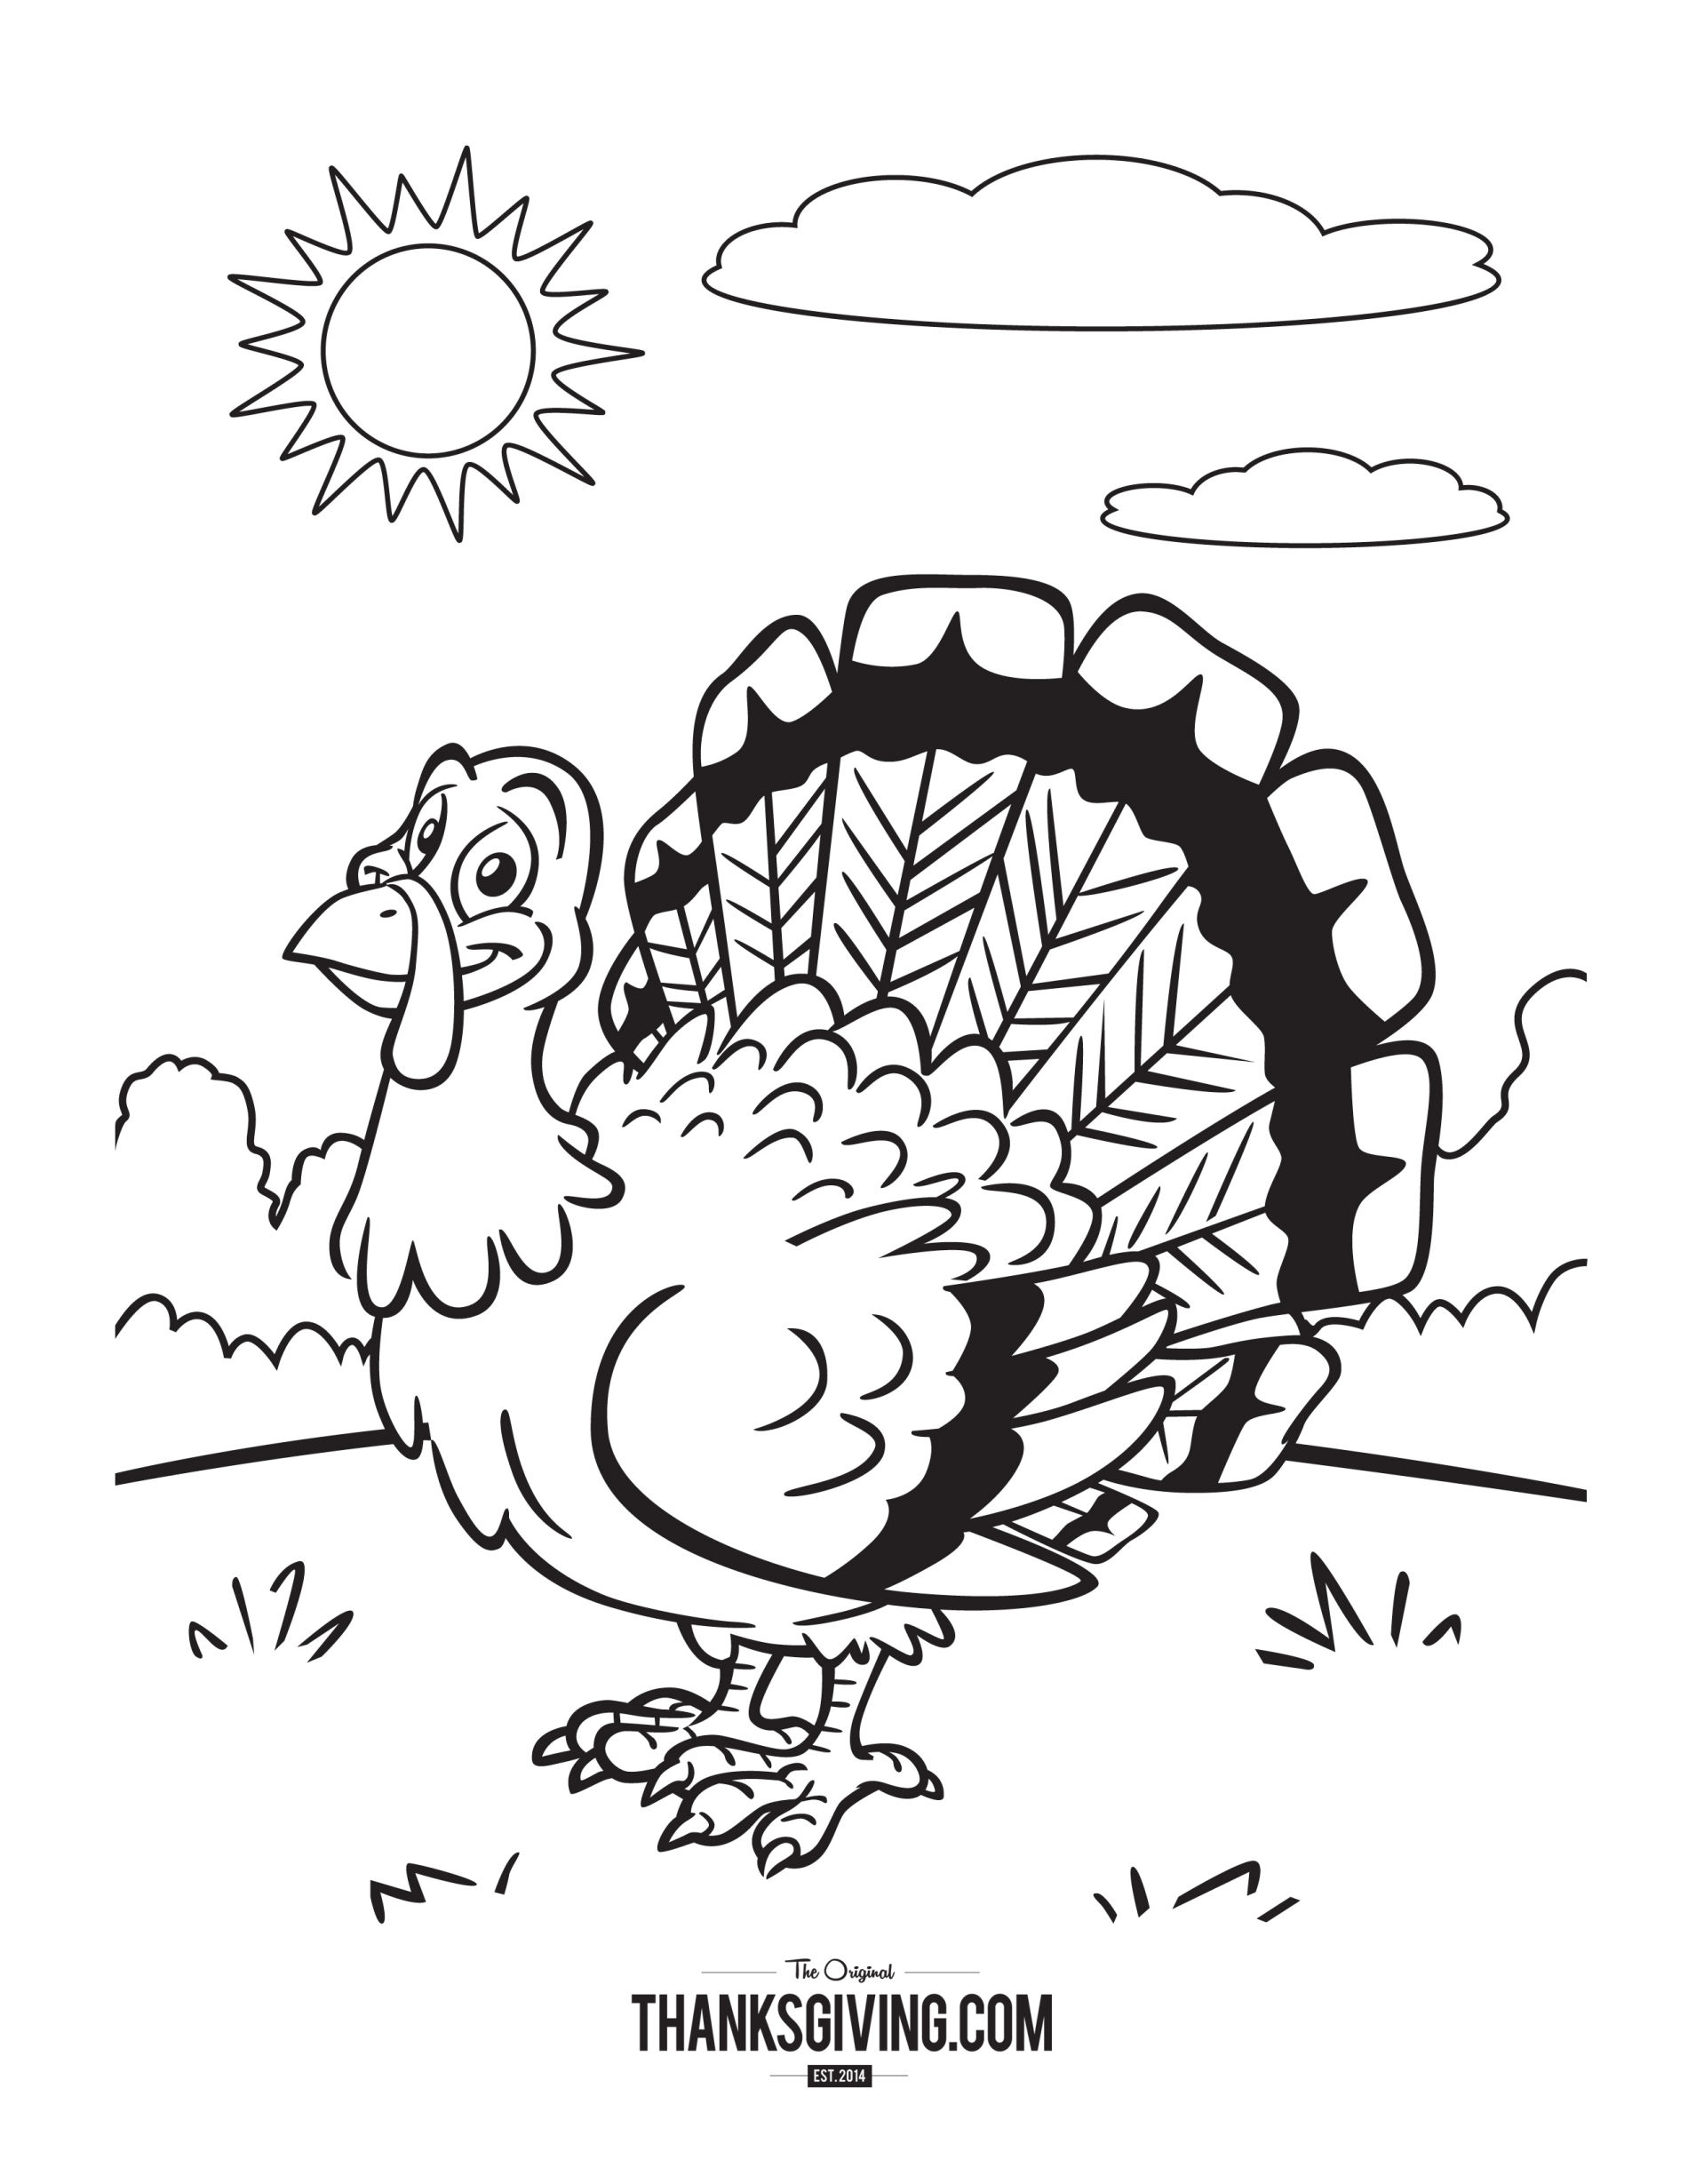 Coloring Pages : Thanksgivinging Book Pages For Kids Sunny Turkey - Free Printable Thanksgiving Books